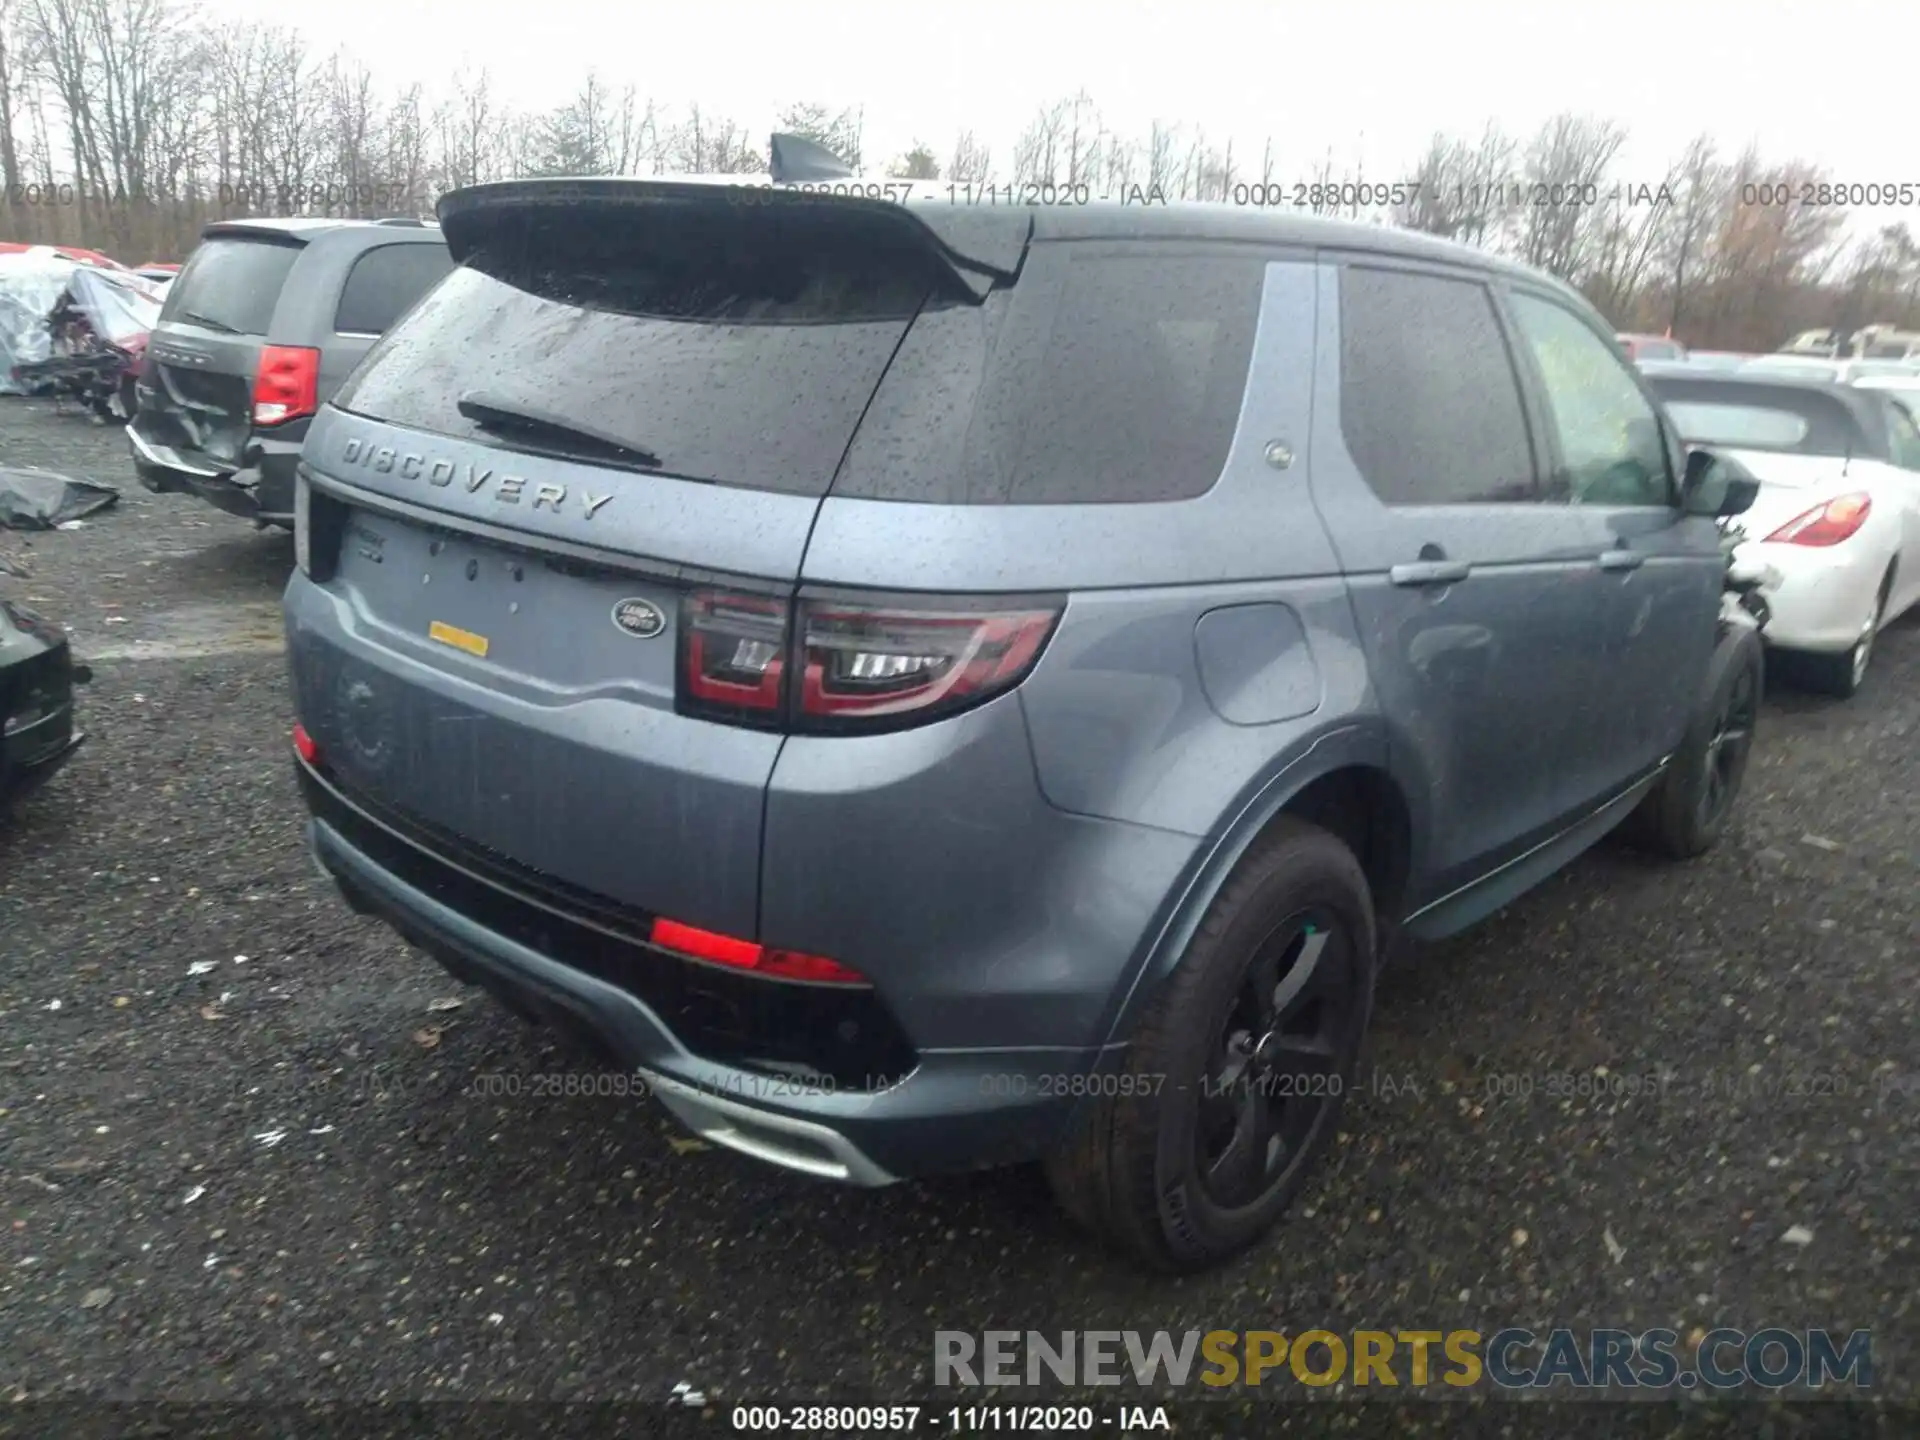 4 Photograph of a damaged car SALCT2FX7LH837637 LAND ROVER DISCOVERY SPORT 2020